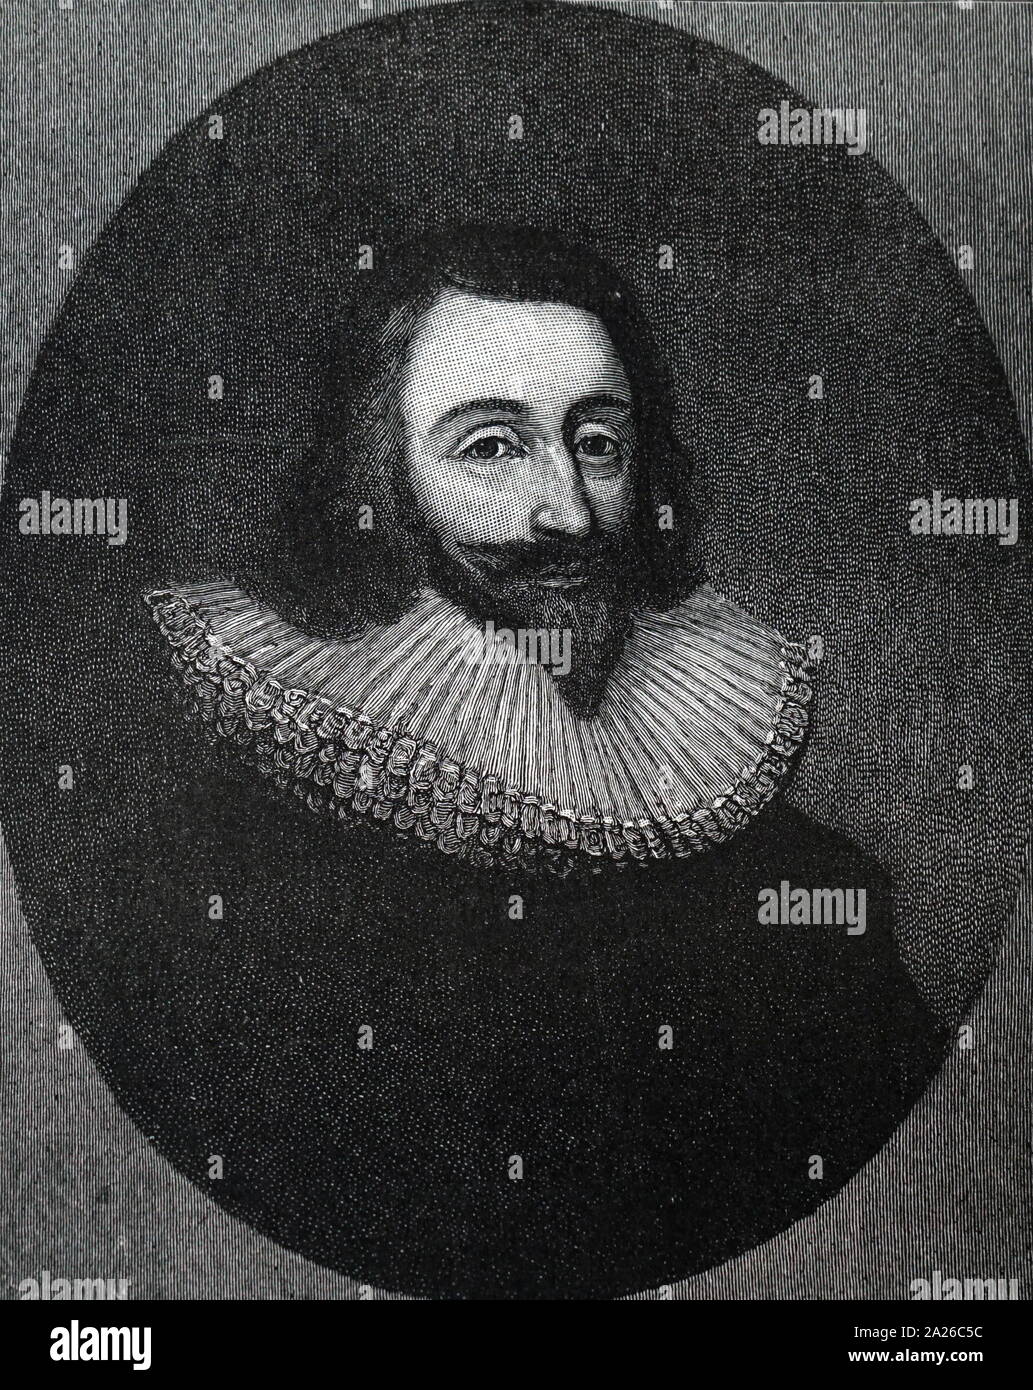 An engraving depicting Sir John Elliot (1592-1632) s an English statesman who was serially imprisoned in the Tower of London, where he eventually died, by King Charles I for advocating the rights and privileges of Parliament. Dated 19th century Stock Photo